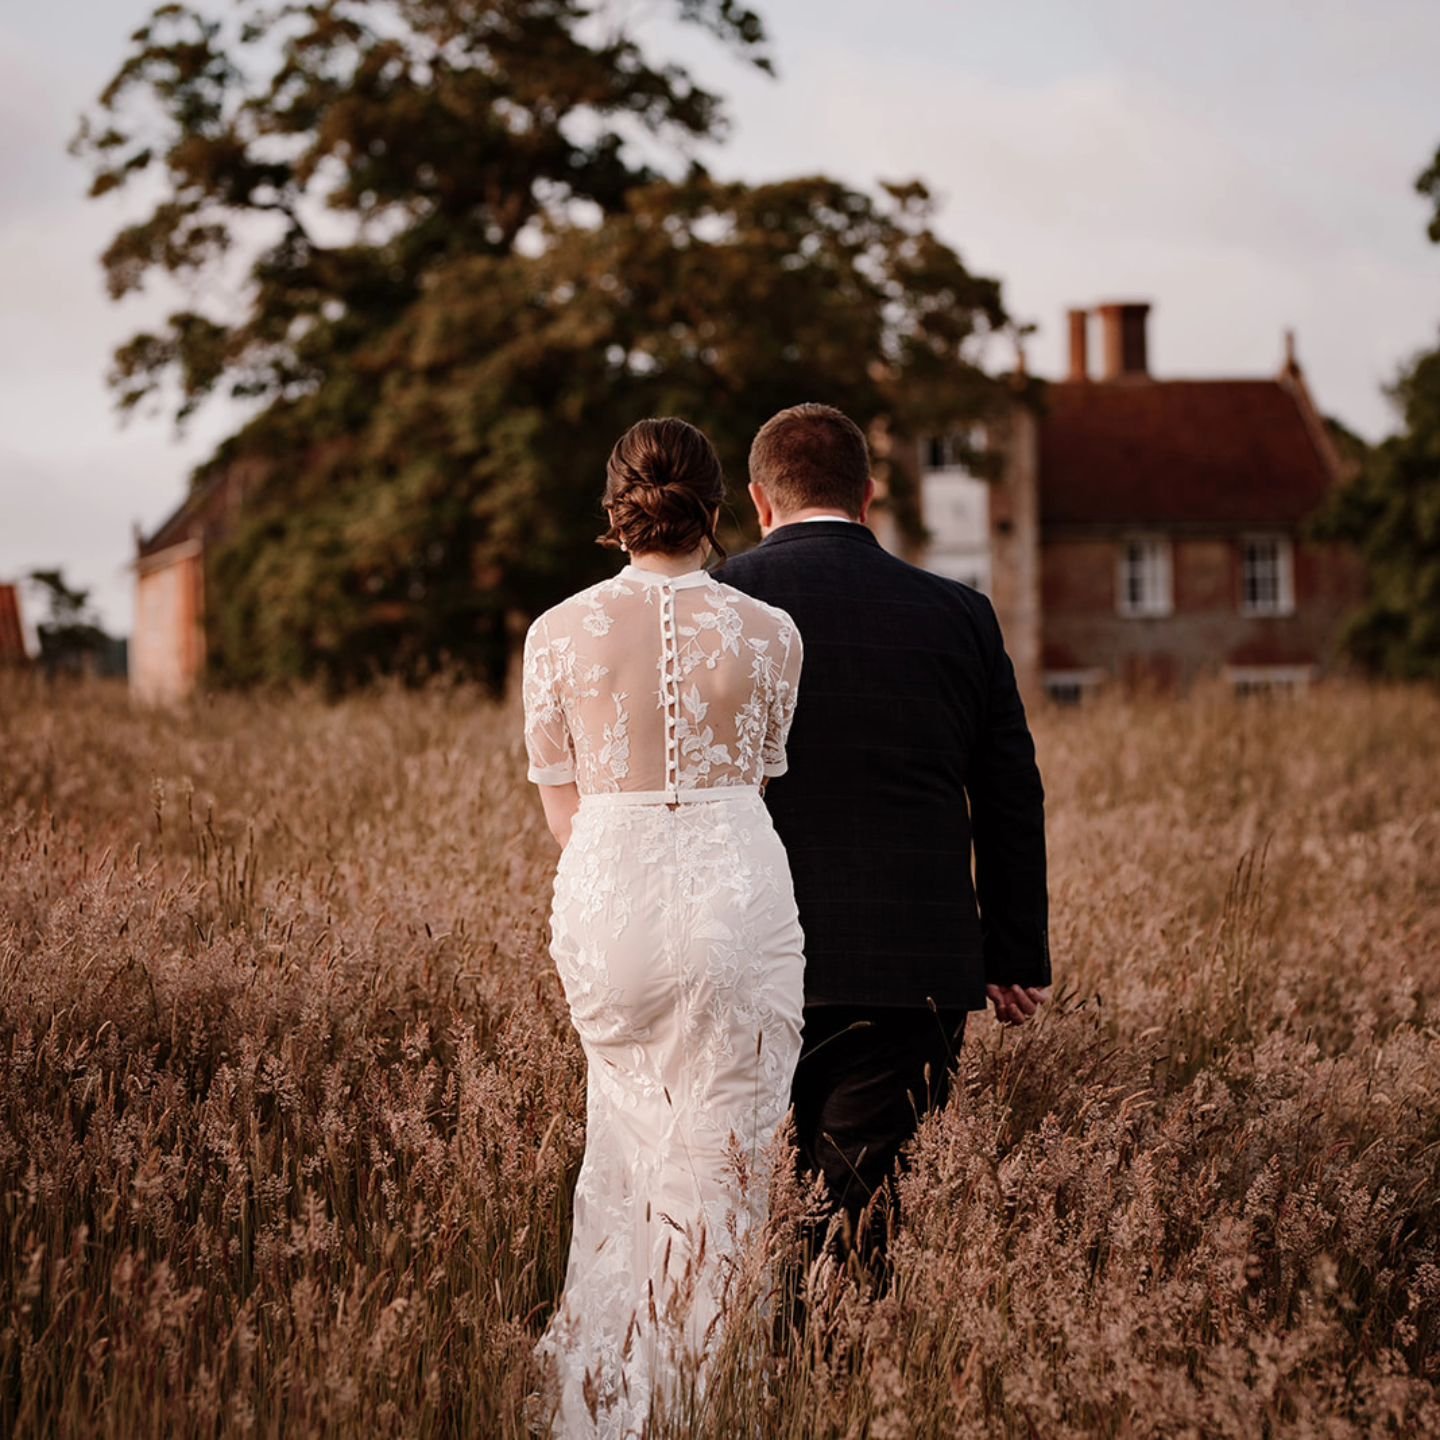 Dreaming of saying &quot;I Do&quot;? 💍

Click the link on our Instagram Bio to arrange a private viewing today. 💍

📸 credit: @taylorhughesphotography 

#weddingviewing #privatetour #weddingvenuesearch #weddinginspo #luxuryweddingvenue #suffolkvenu